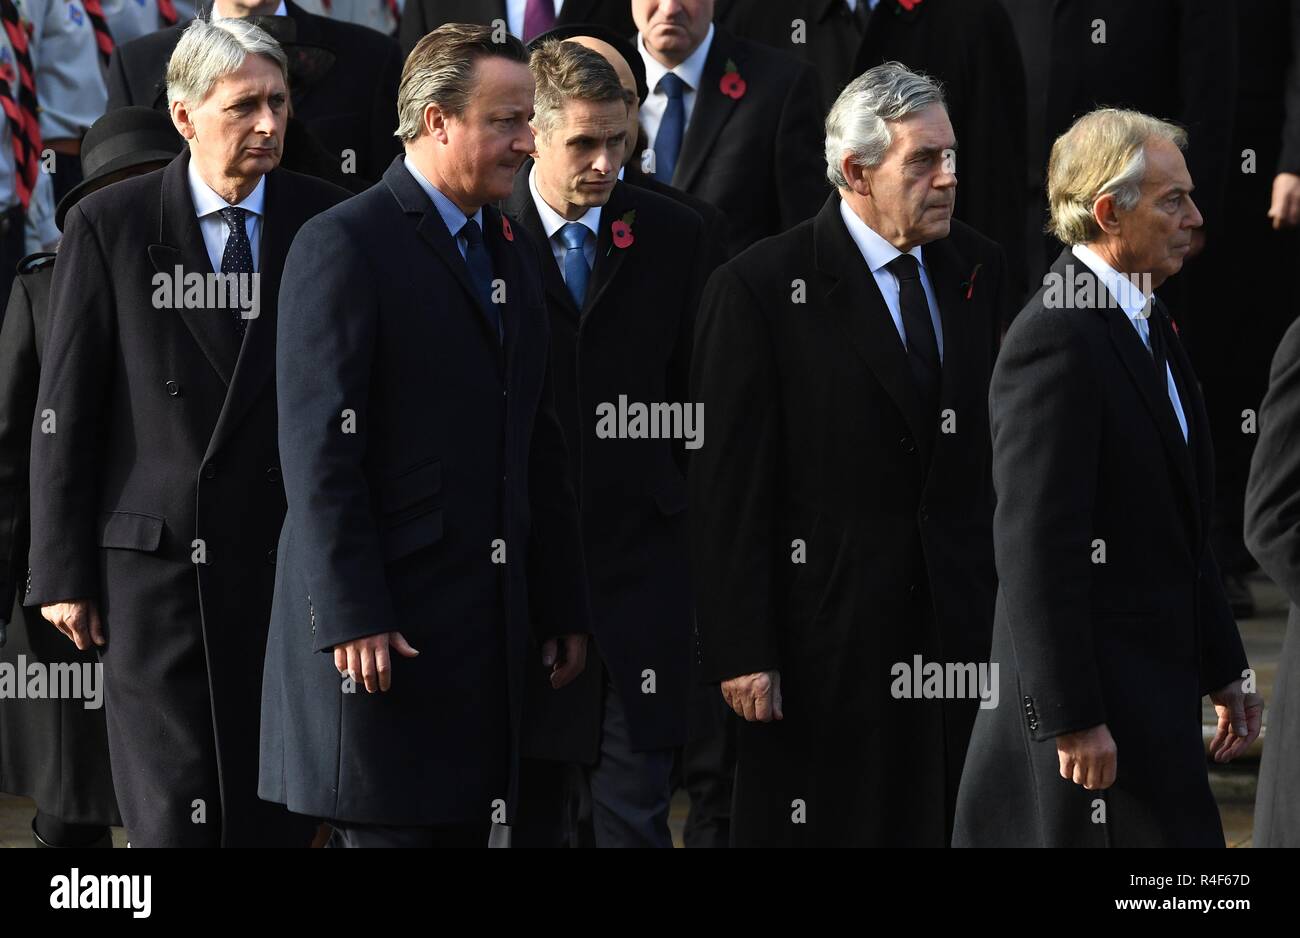 11/11/2018. London, United Kingdom. Remembrance Sunday and the Centenary of the Armistice. Former Prime Ministers David Cameron, Tony Blair and Gordon Brown   join Queen Elizabeth II accompanied by members of the  Royal family including Prince Charles, Prince of Wales and Camilla, The Duchess of Cornwall,  Prince William, Duke of Cambridge and Catherine, The  Duchess of Cambridge,  Prince Harry, The Duke of Sussex and Meghan, The Duchess of Sussex , attend the Remembrance Sunday service at The Cenotaph in central London on  the Centenary of the end of the First World War.  Picture by Andrew Pa Stock Photo